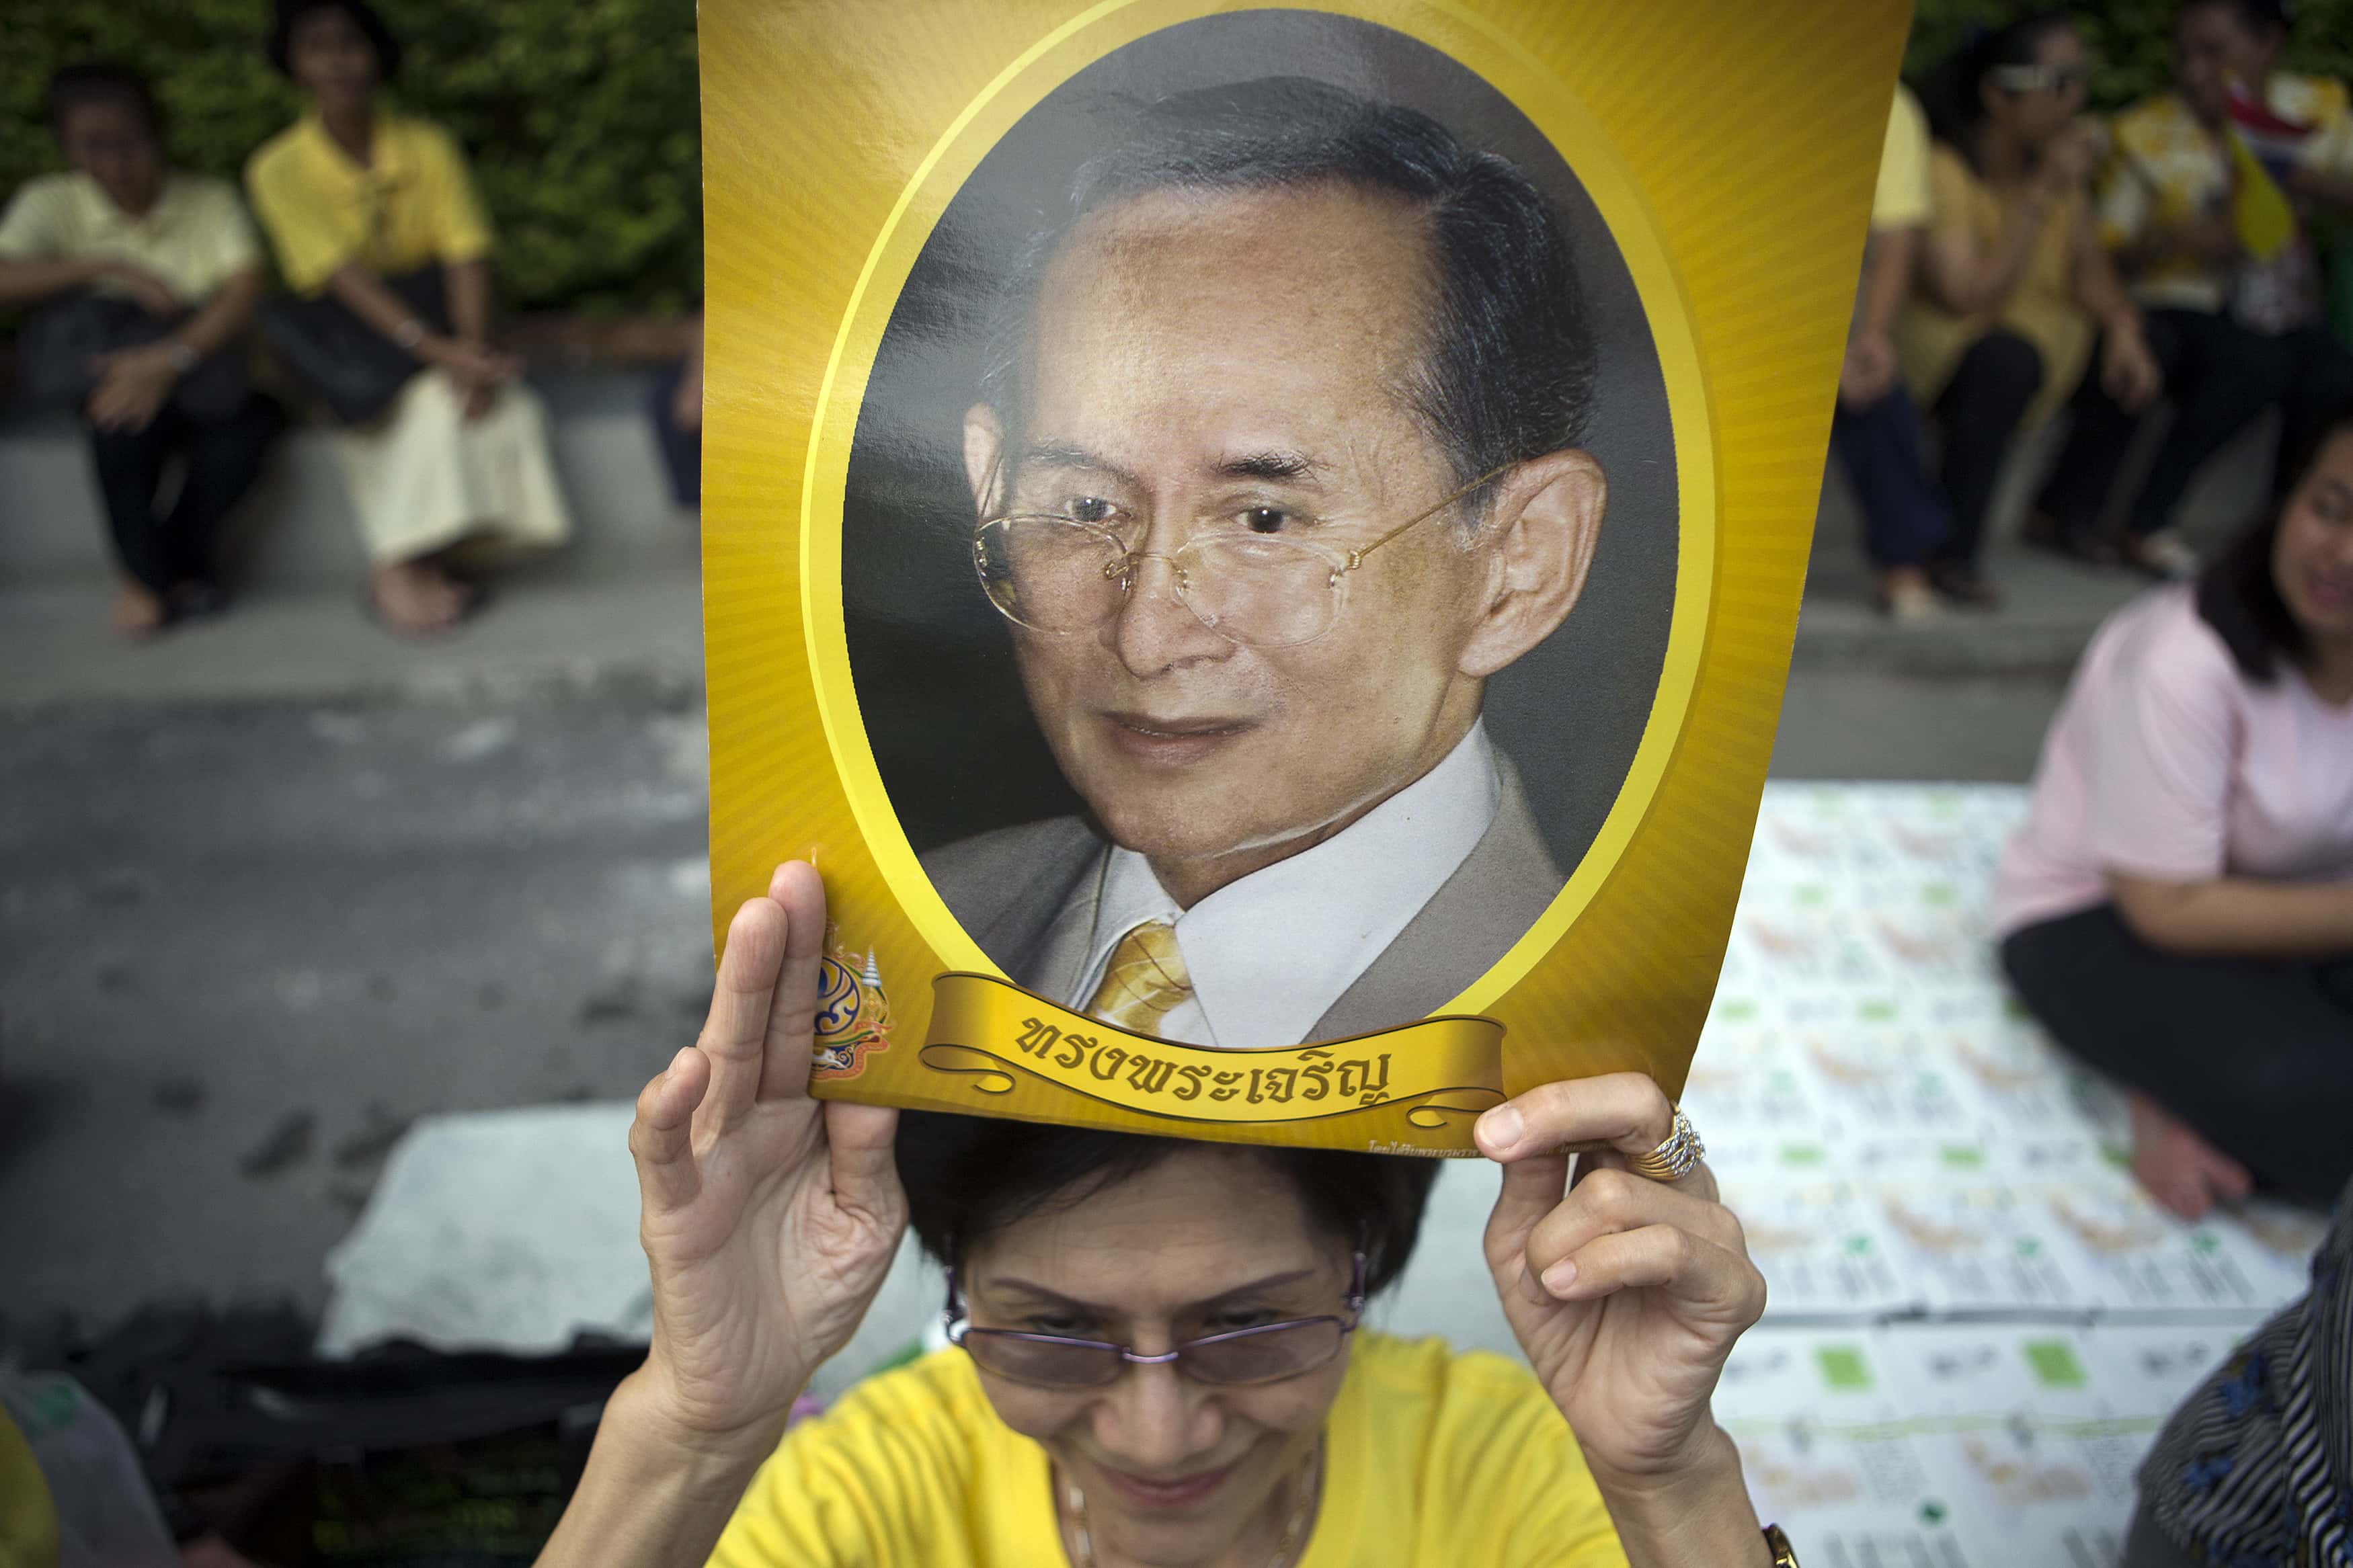 Editor Nut Rungwong has been convicted of defaming King Bhumibol Adulyadej, pictured in this image held by one of his supporters, in Bangkok, 15 September 2014, REUTERS/Athit Perawongmetha